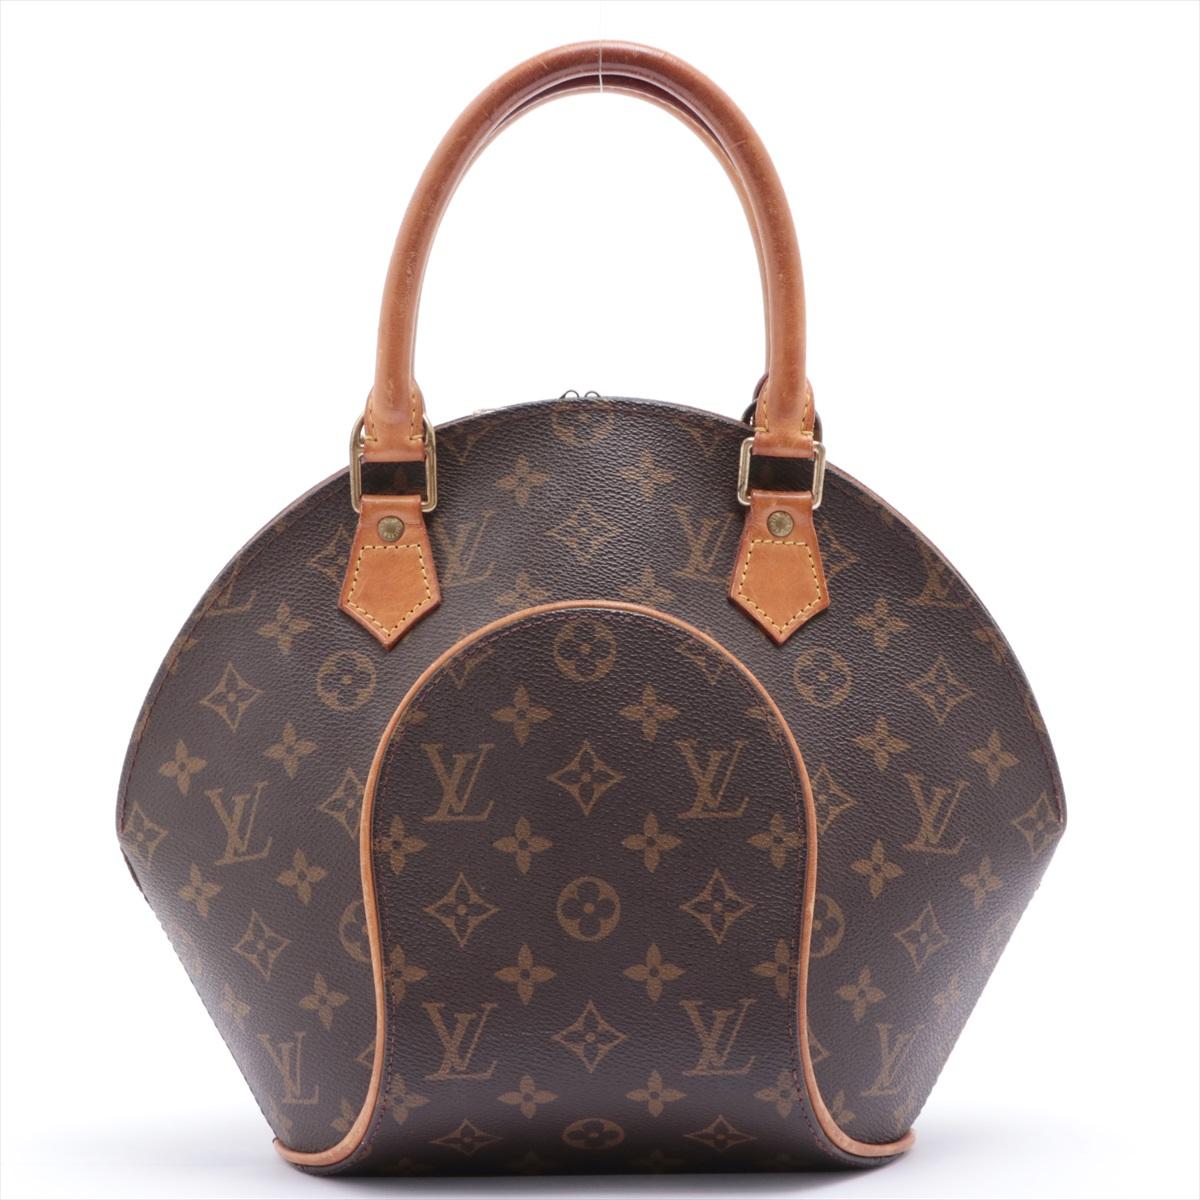 Louis Vuitton Monogram Canvas Leather Ellipse PM Bag In Good Condition For Sale In Irvine, CA